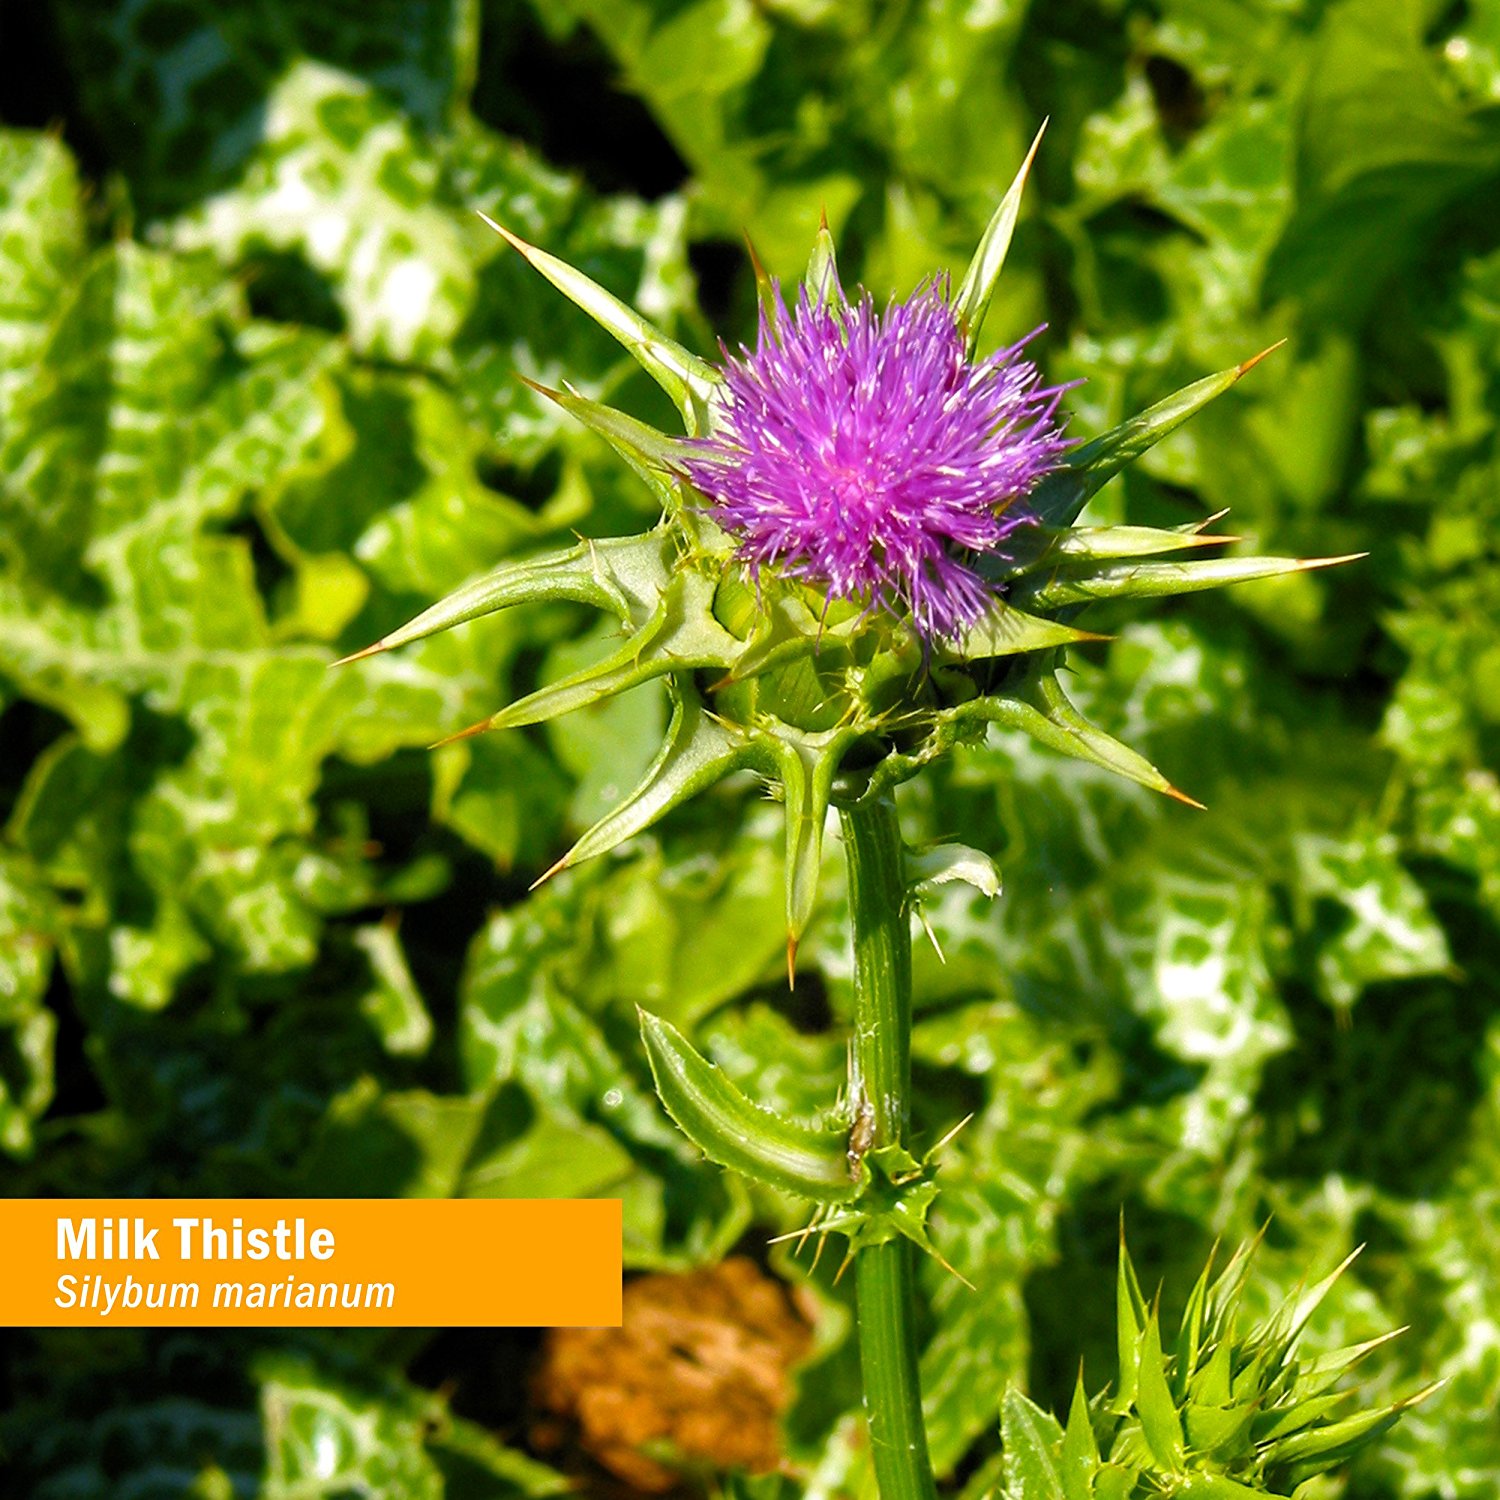 Amazon.com: Herb Pharm Milk Thistle Seed Extract for Liver Function ...